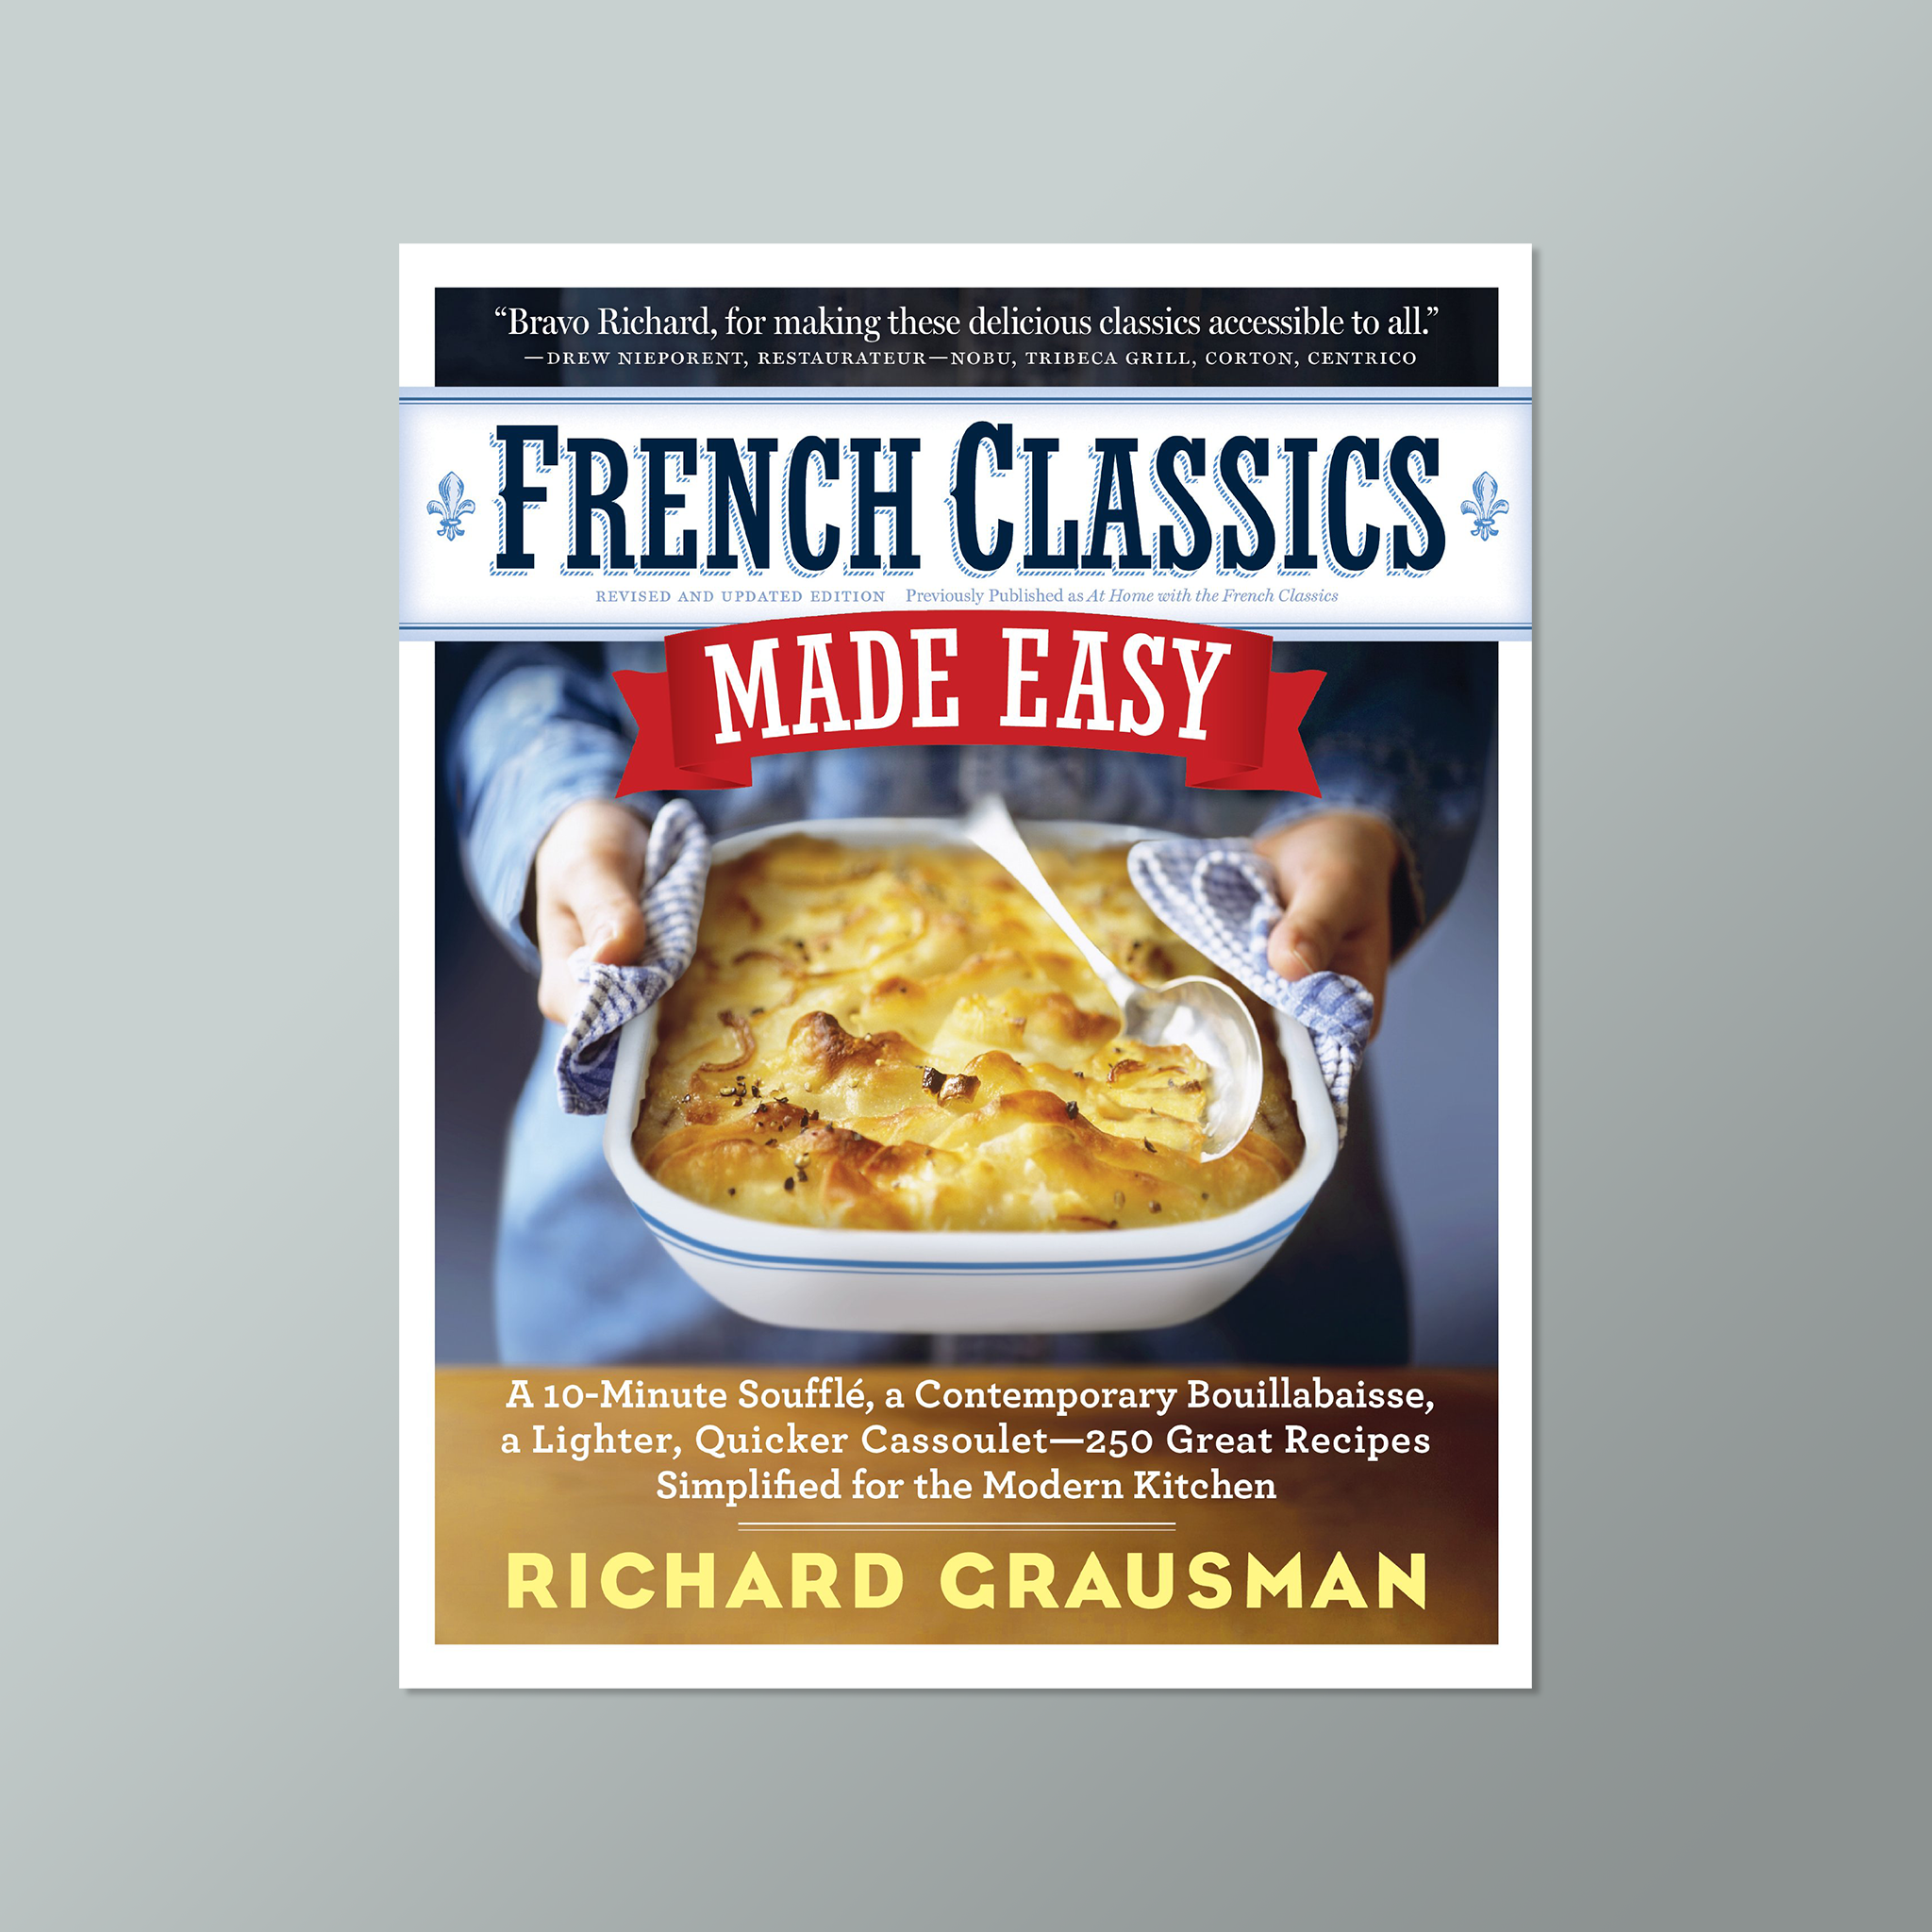 French Classics Made Easy cookbook